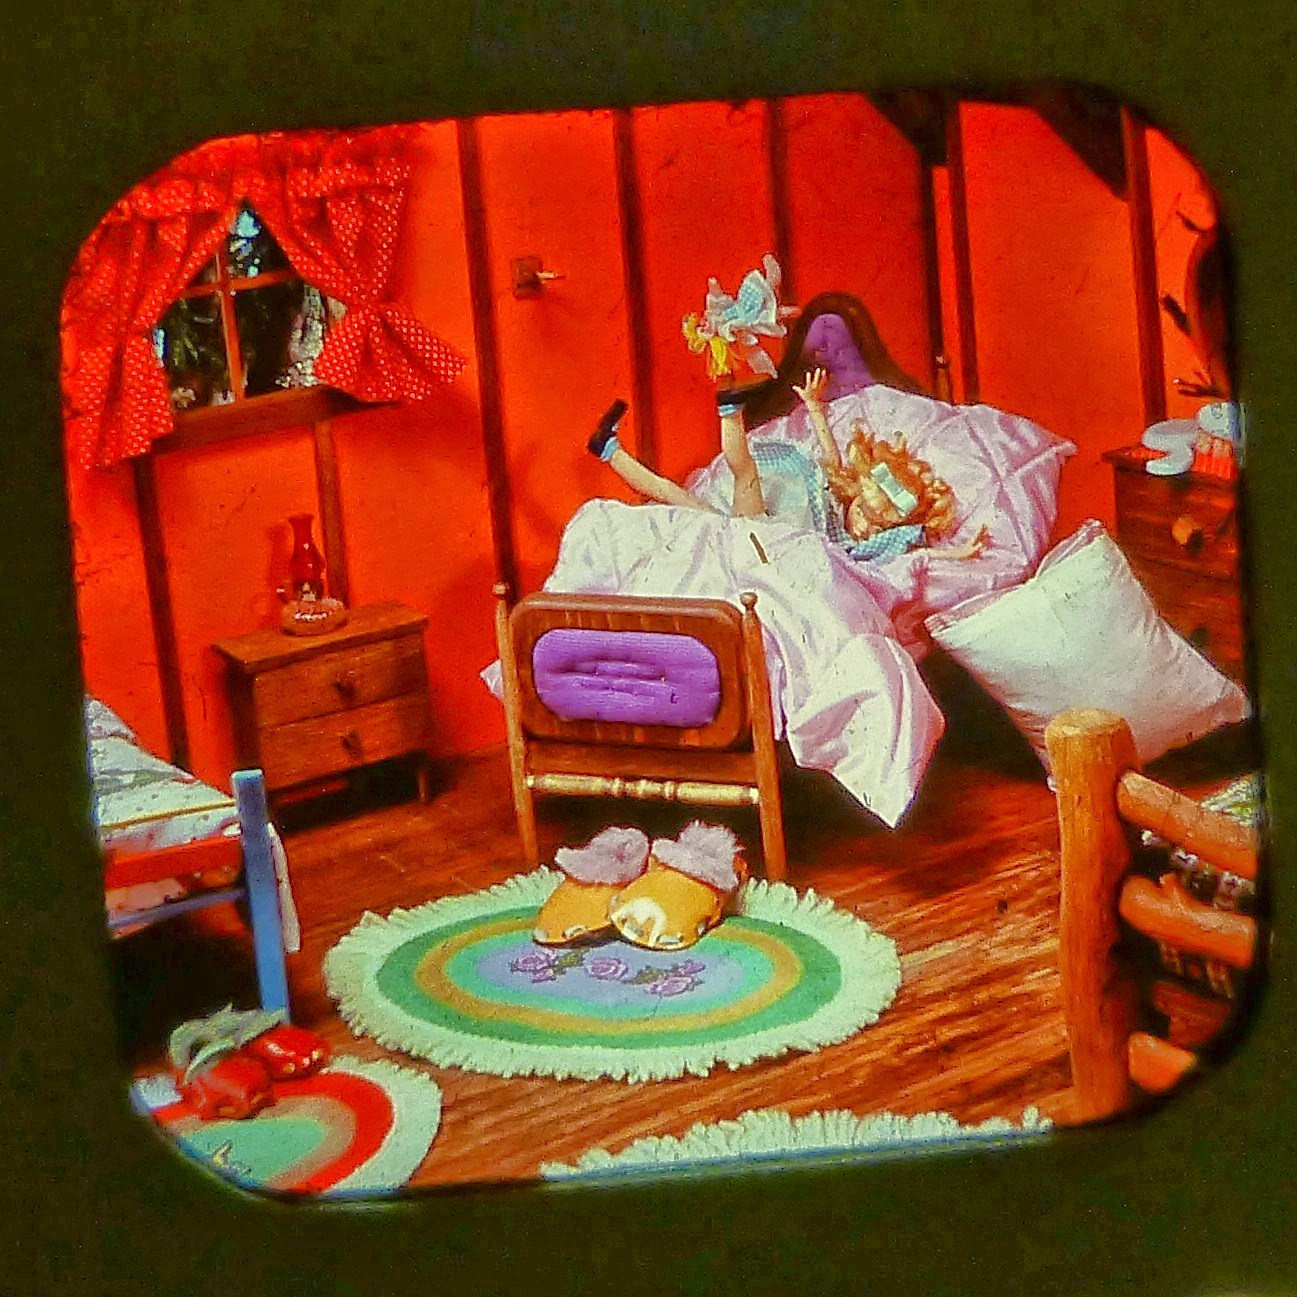  Goldilocks and The Three Bears - Classic Clay Figure Art -  ViewMaster - 3 Reel Set - 21 3D Images : Toys & Games